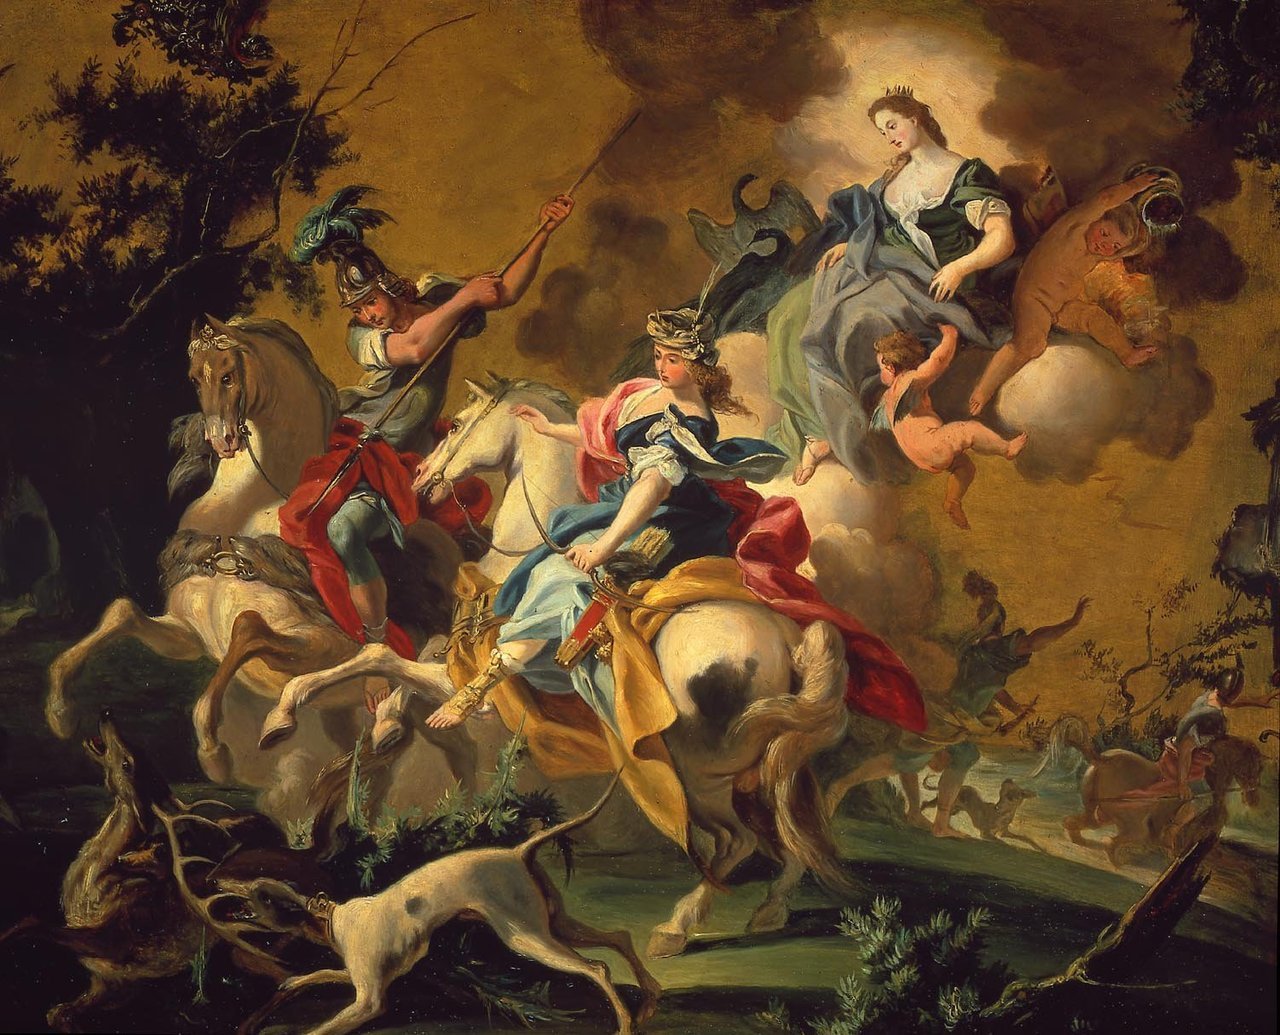 hildegardavon:
“  Filippo Falciatore, documented 1718-1768 in Naples
The royal hunt of Dido and Aeneas, n/d, oil on canvas, 58x71 cm
Private Collection
”